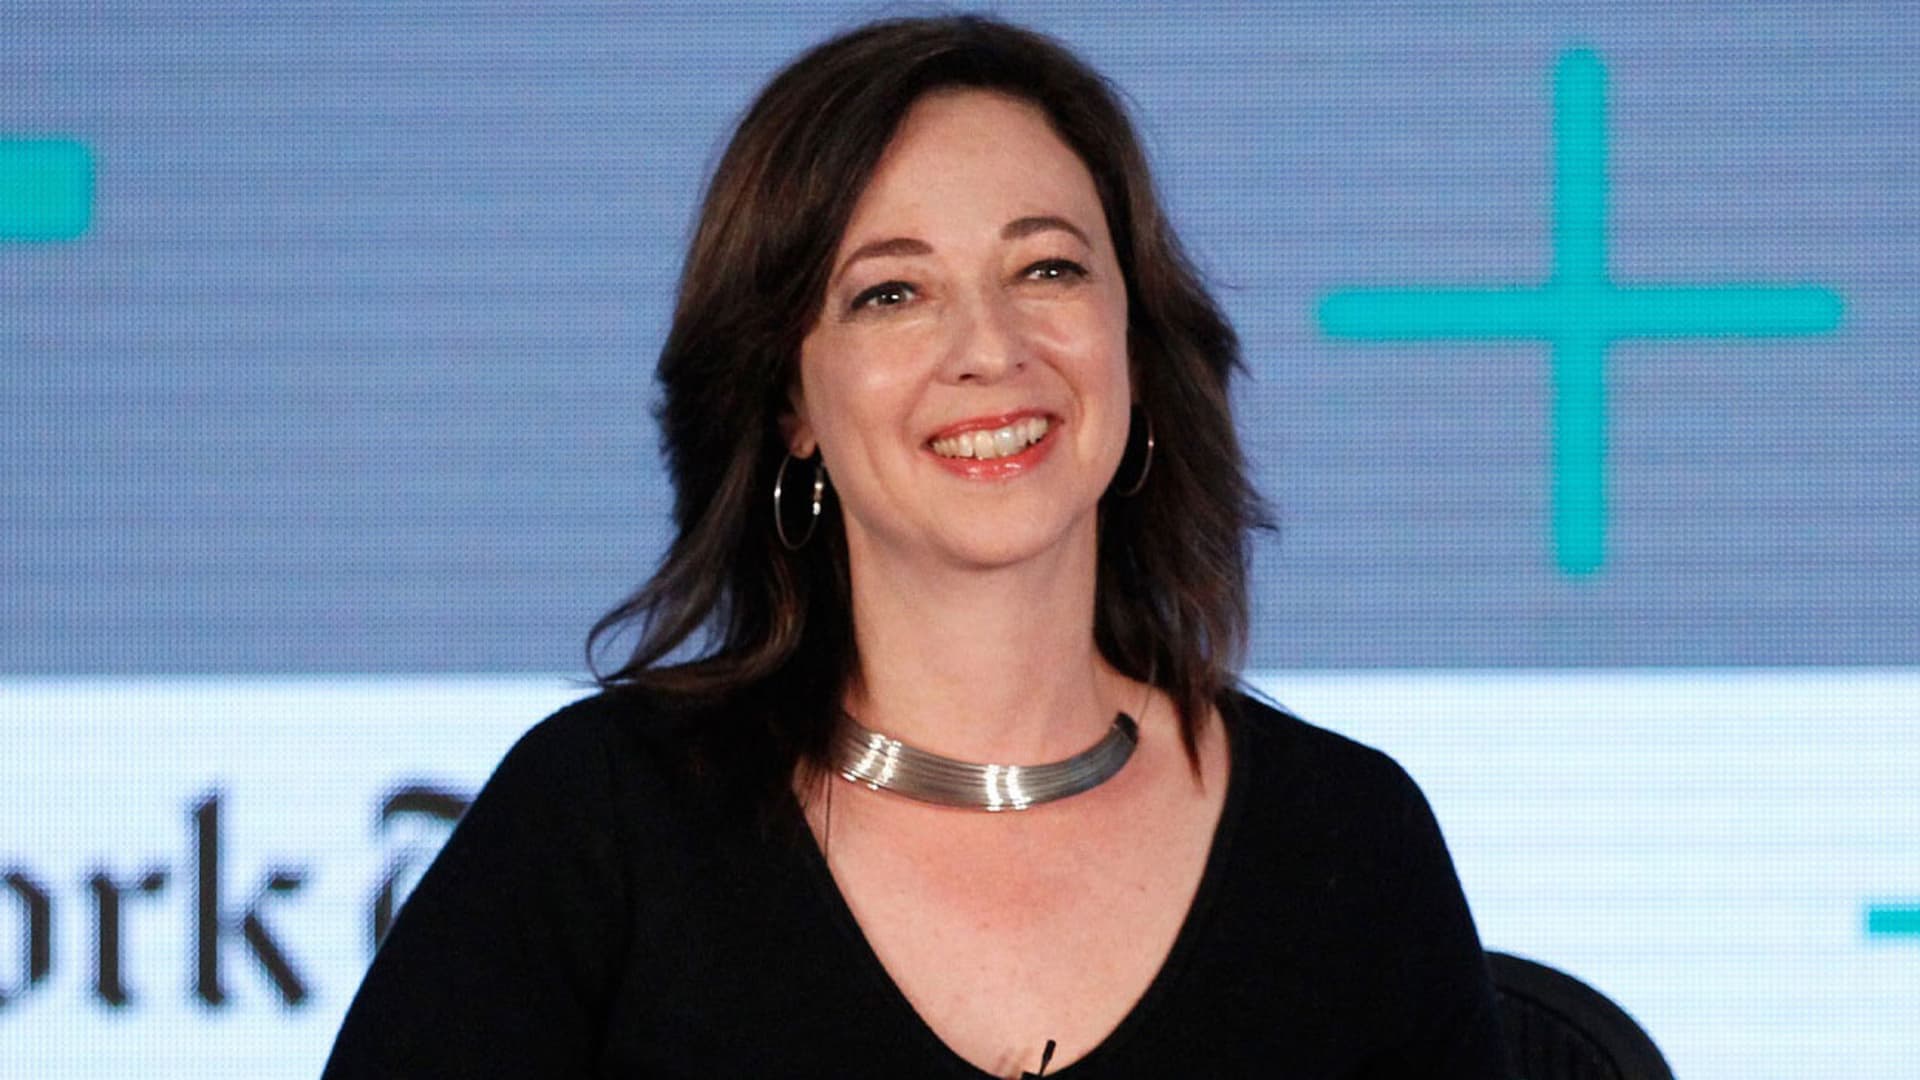 Introverts are ‘routinely passed up’ for promotions—but have 3 traits that can make great leaders, says best-selling author Susan Cain